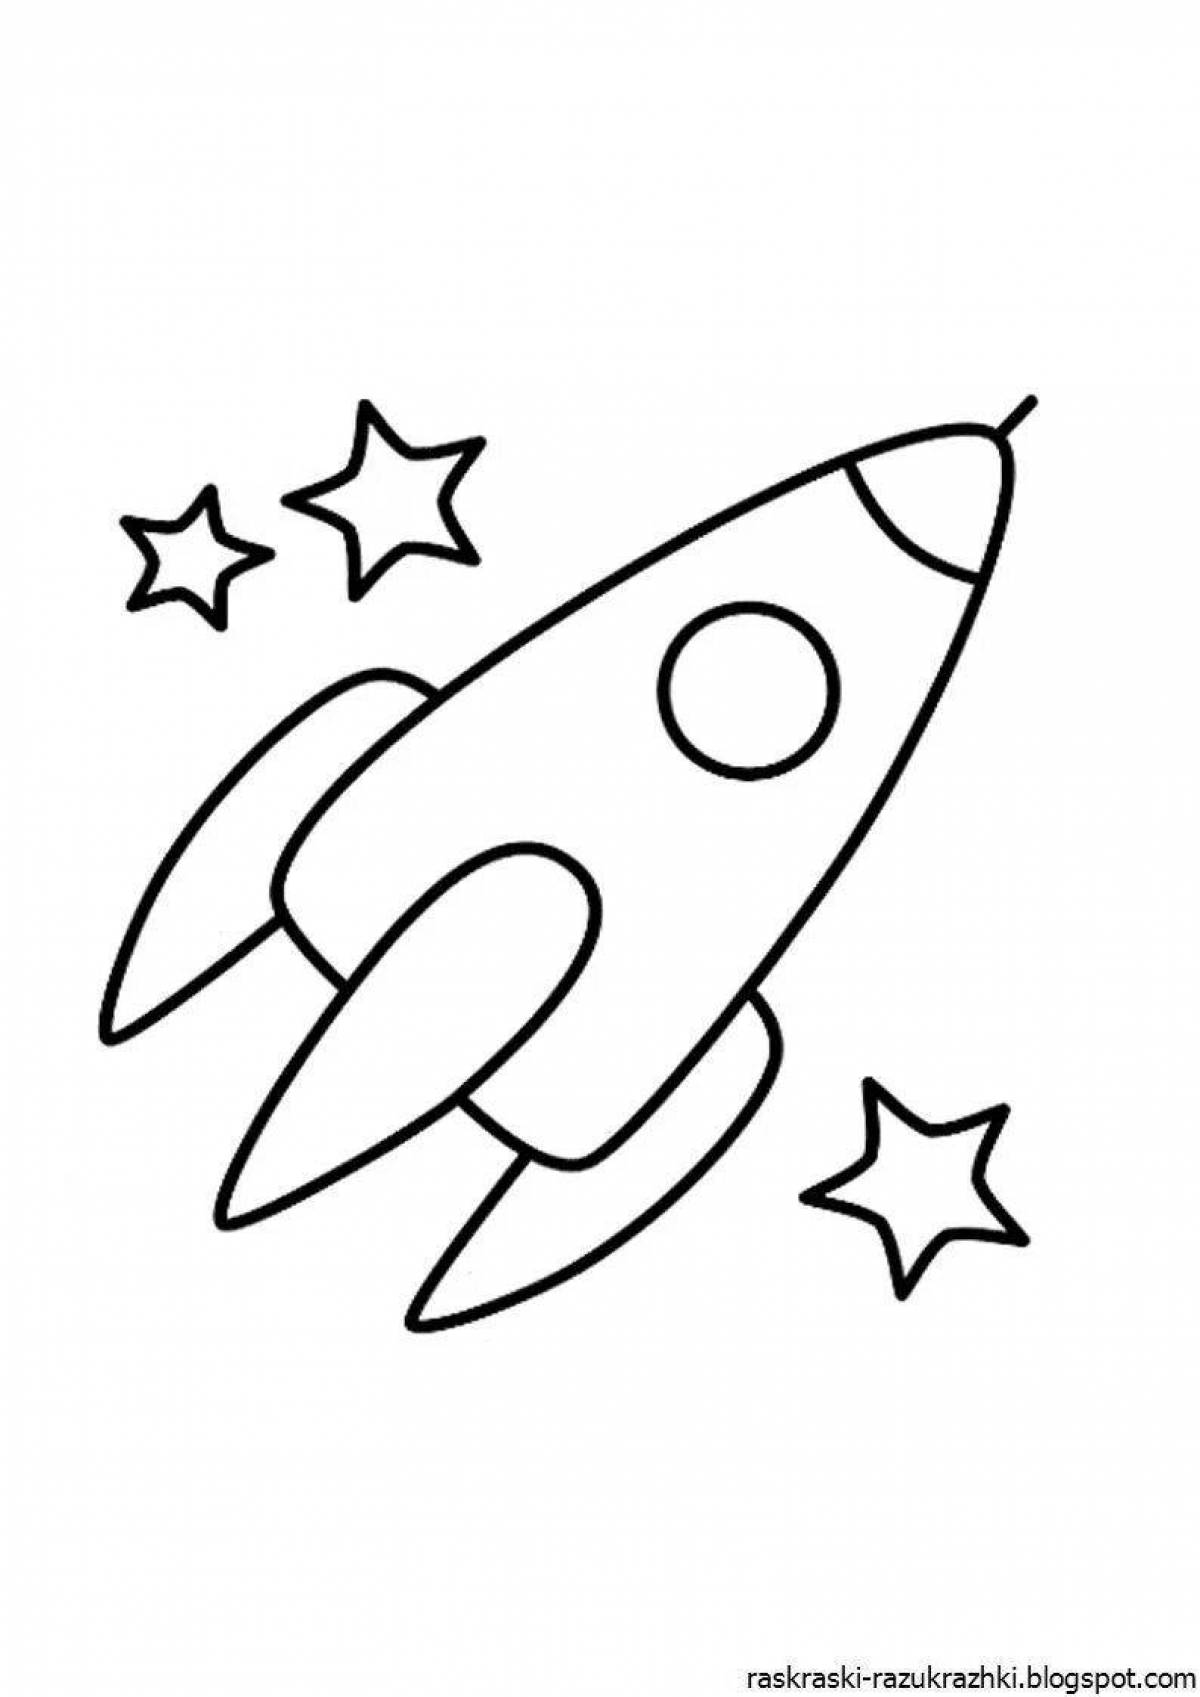 Playful rocket coloring book for 3-4 year olds